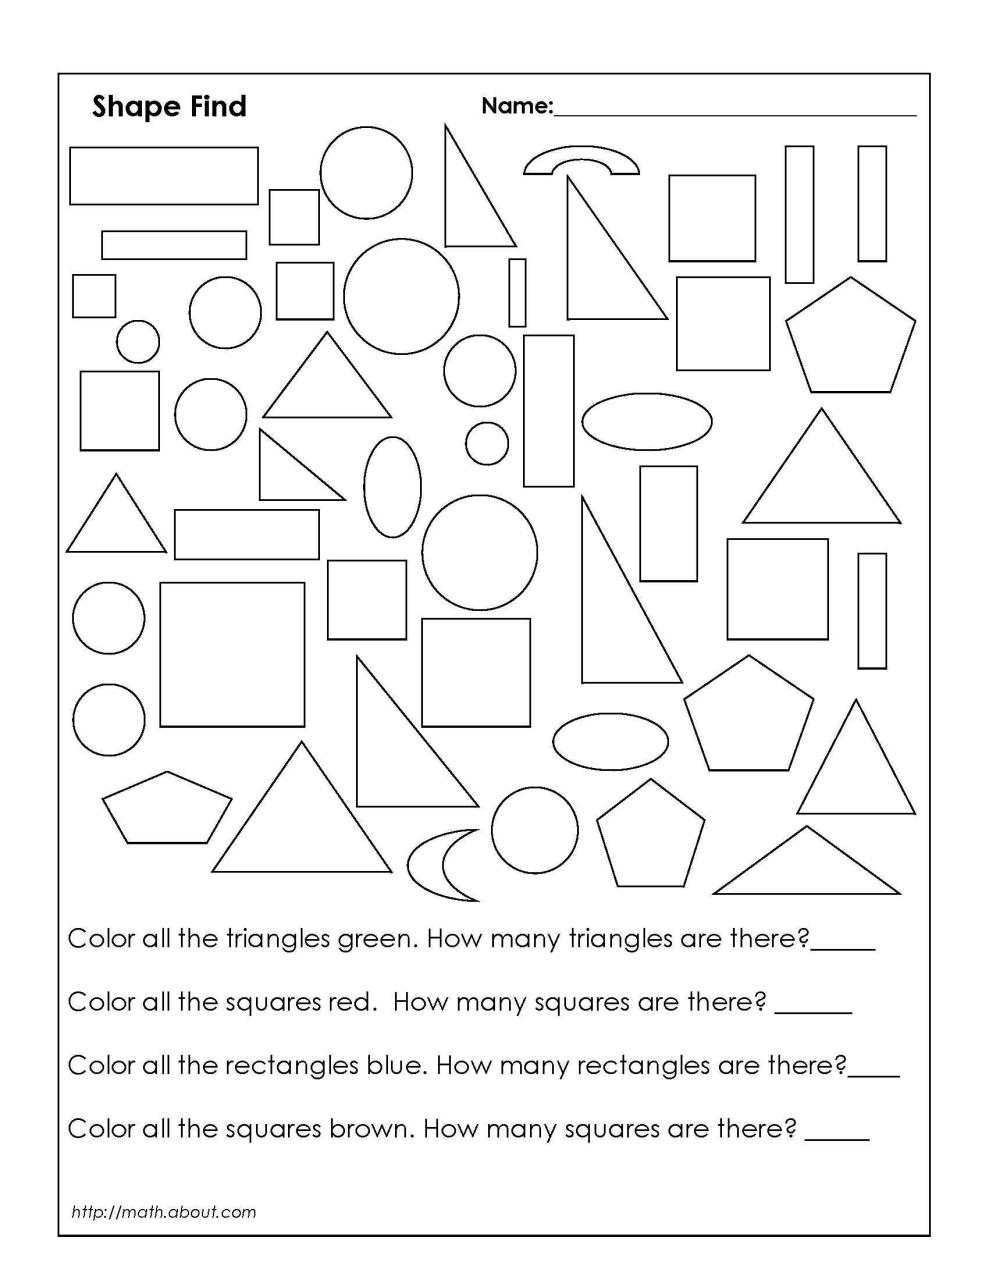 1st Grade Geometry Worksheets for Students Geometry worksheets, Math